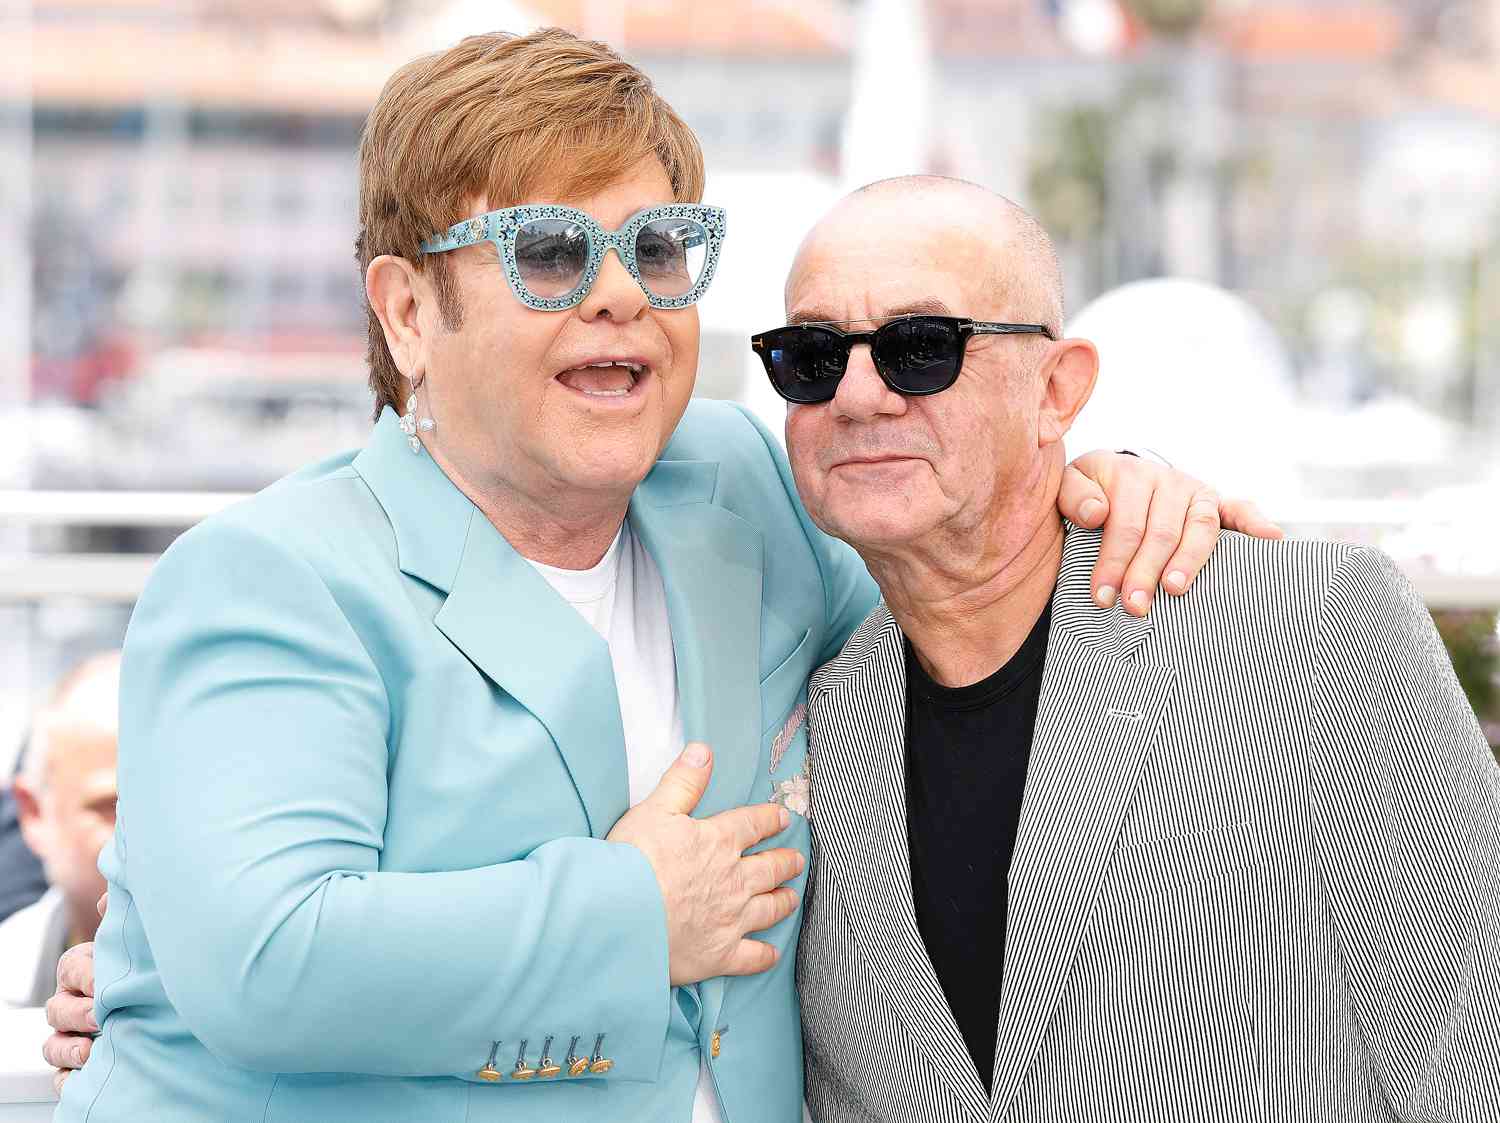 Sir Elton John and Bernie Taupin at the photo call for "Rocketman" during the 72nd Cannes Film Festival at the Palais des Festivals on May 16, 2019 in Cannes, Franc